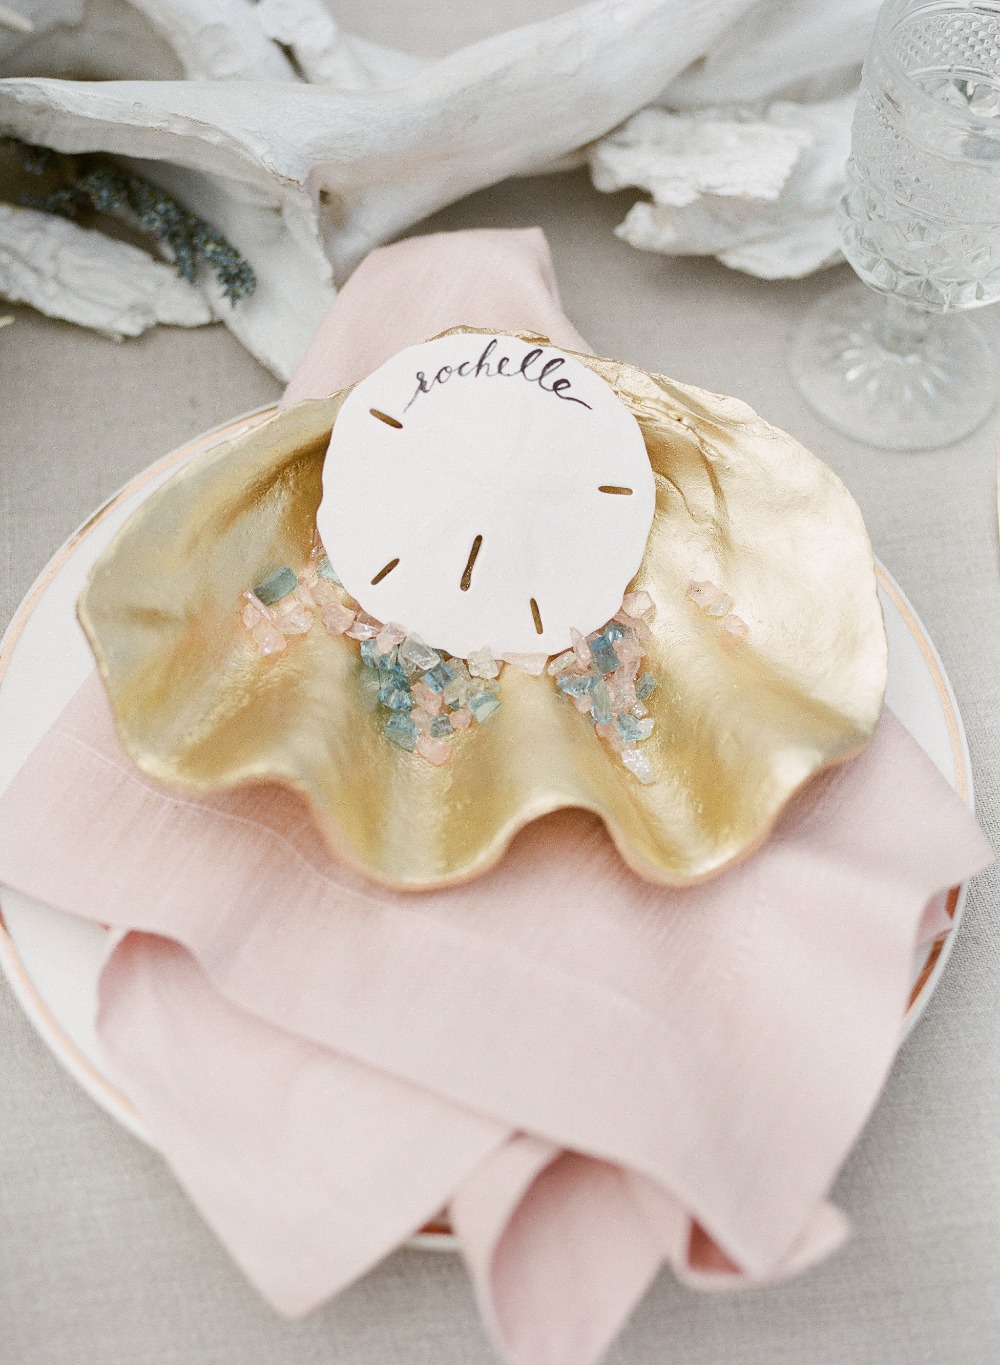 Sea shell place card